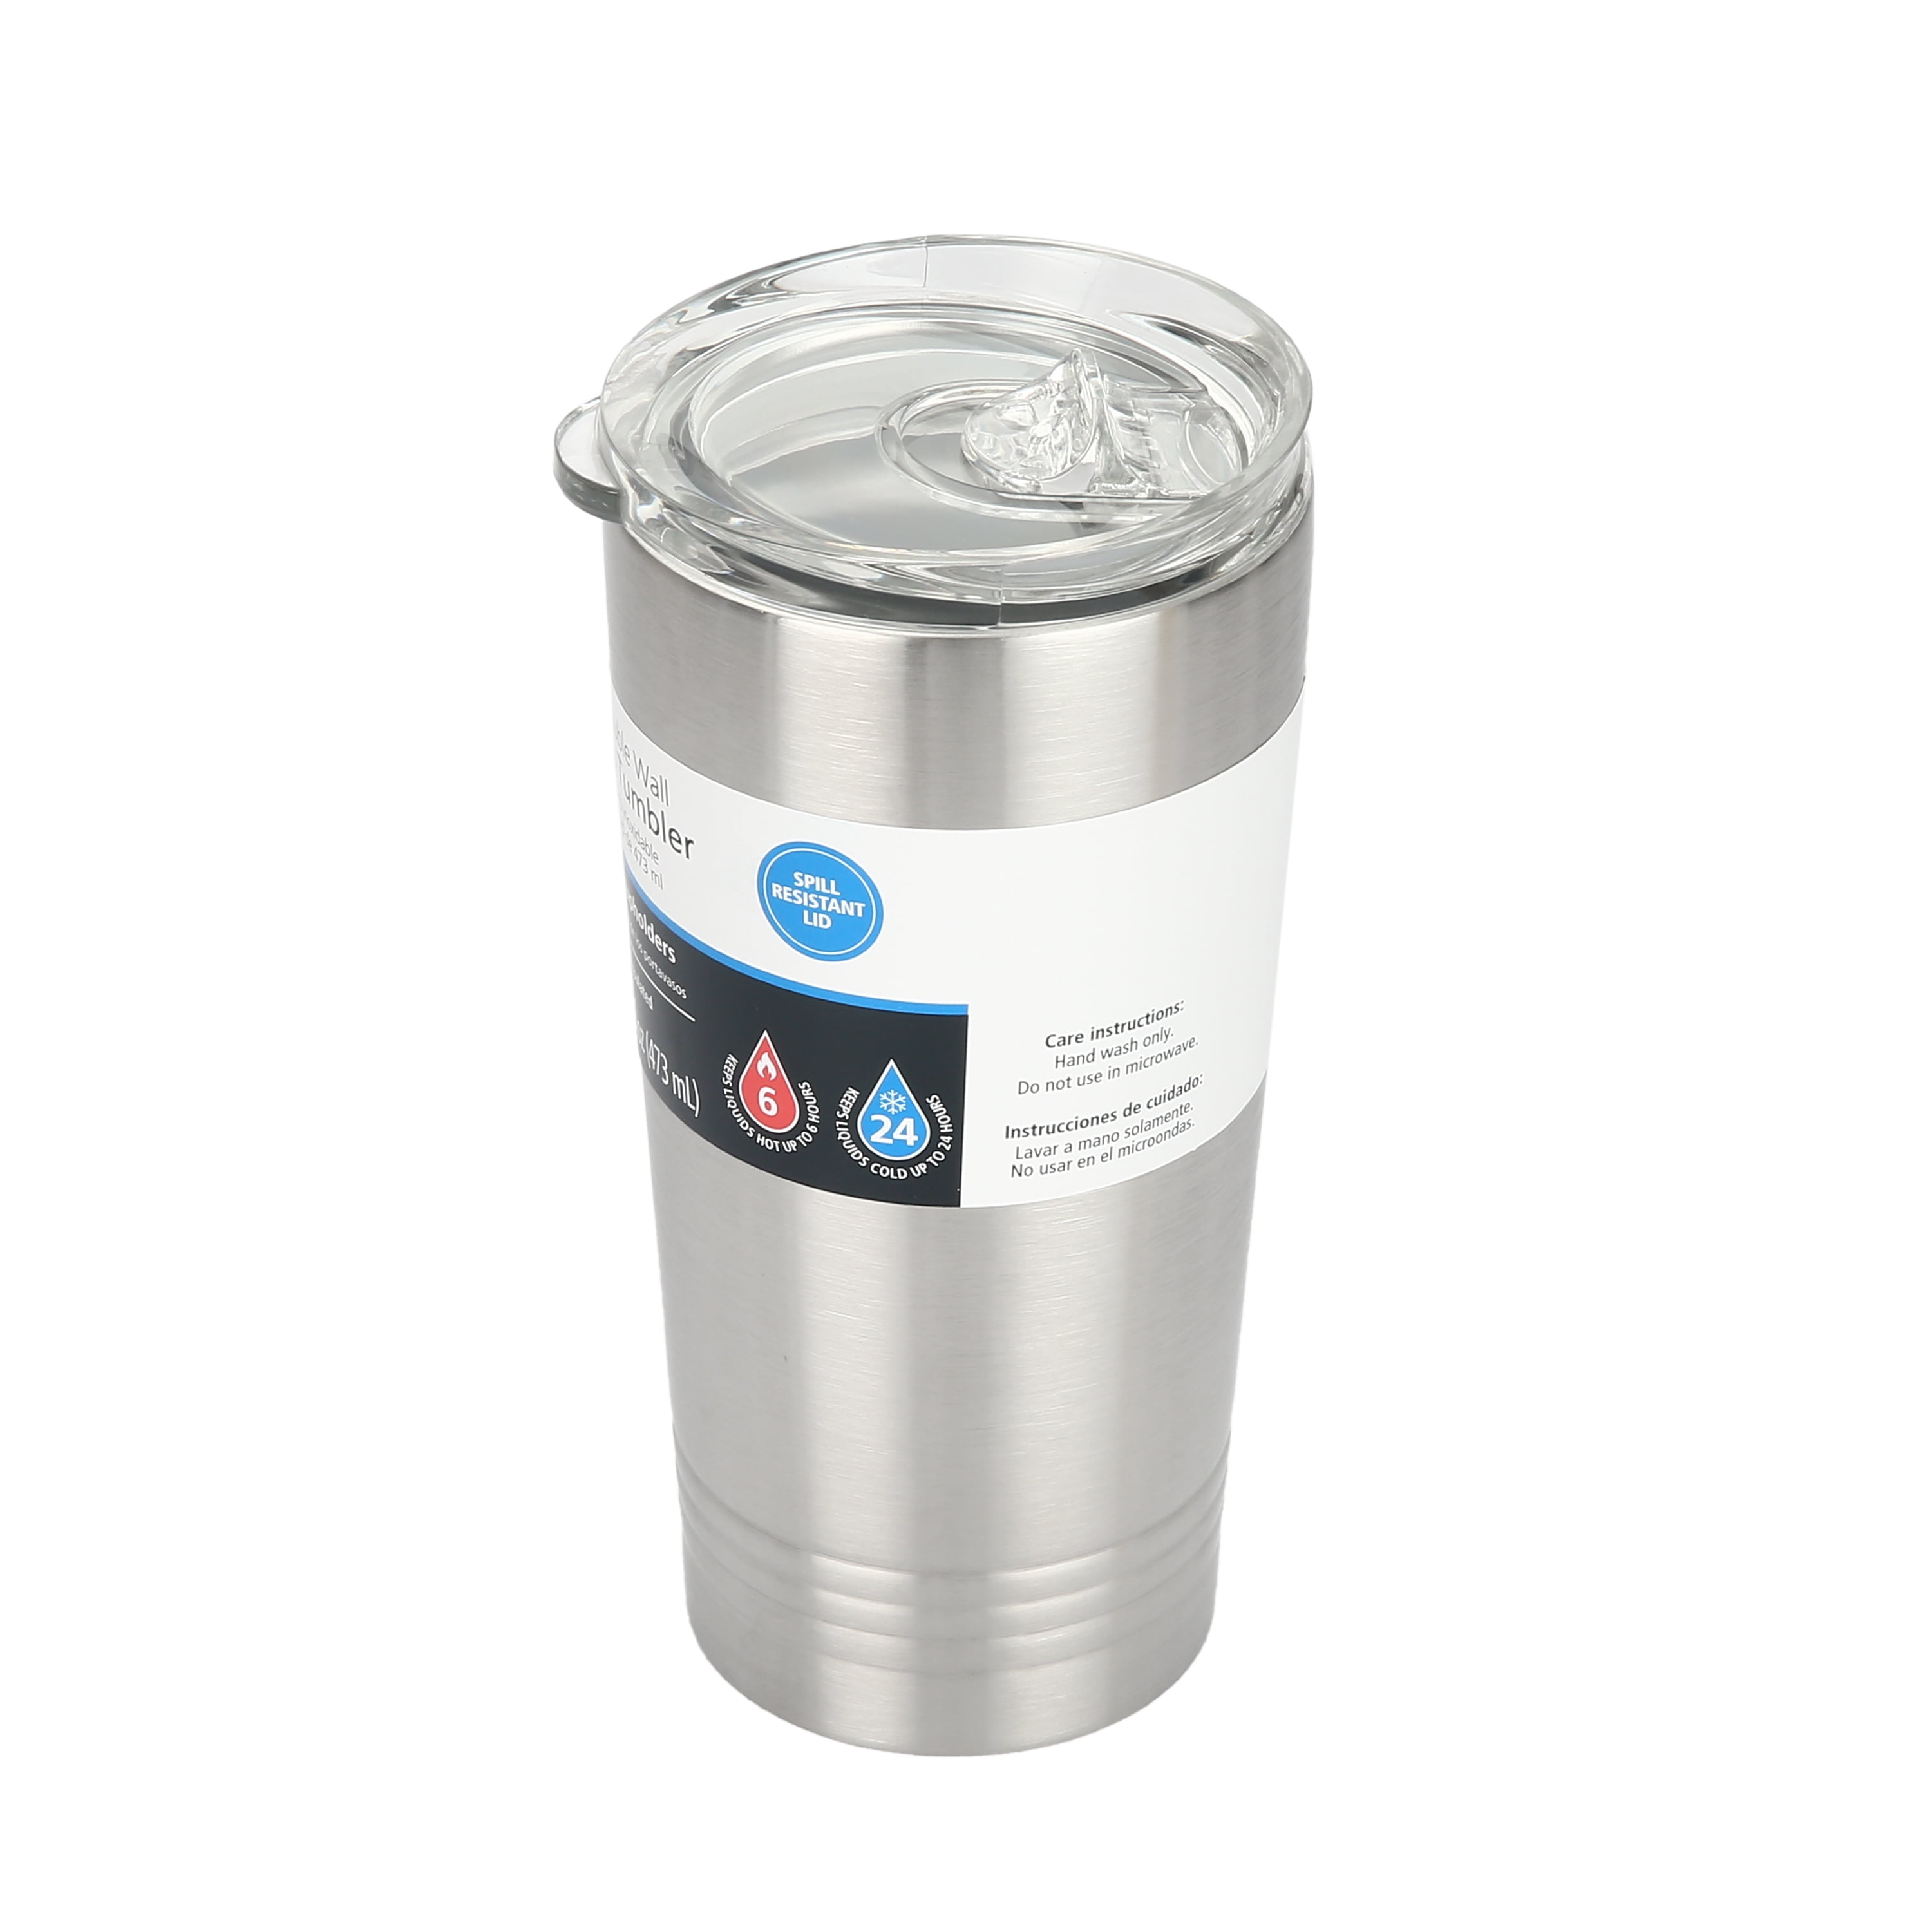 Austin Pacific Blue Stainless Steel Tumbler 16oz